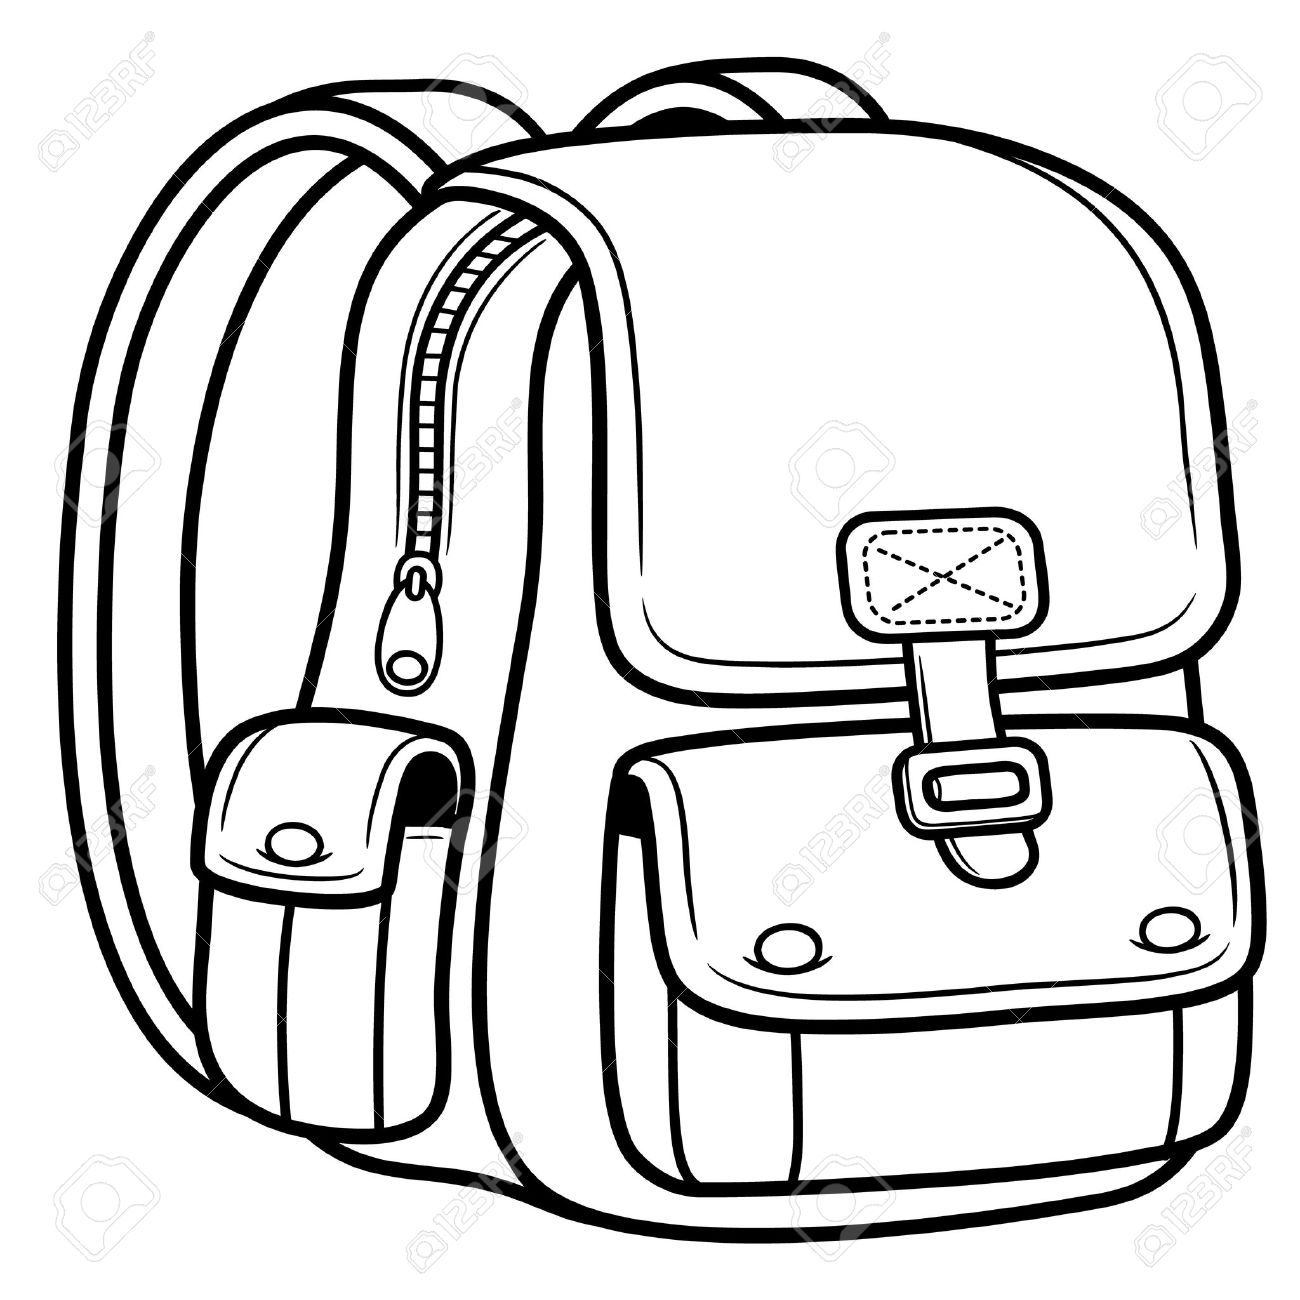 Bag Clipart Black And White Pencil And In Color Bag, Clip